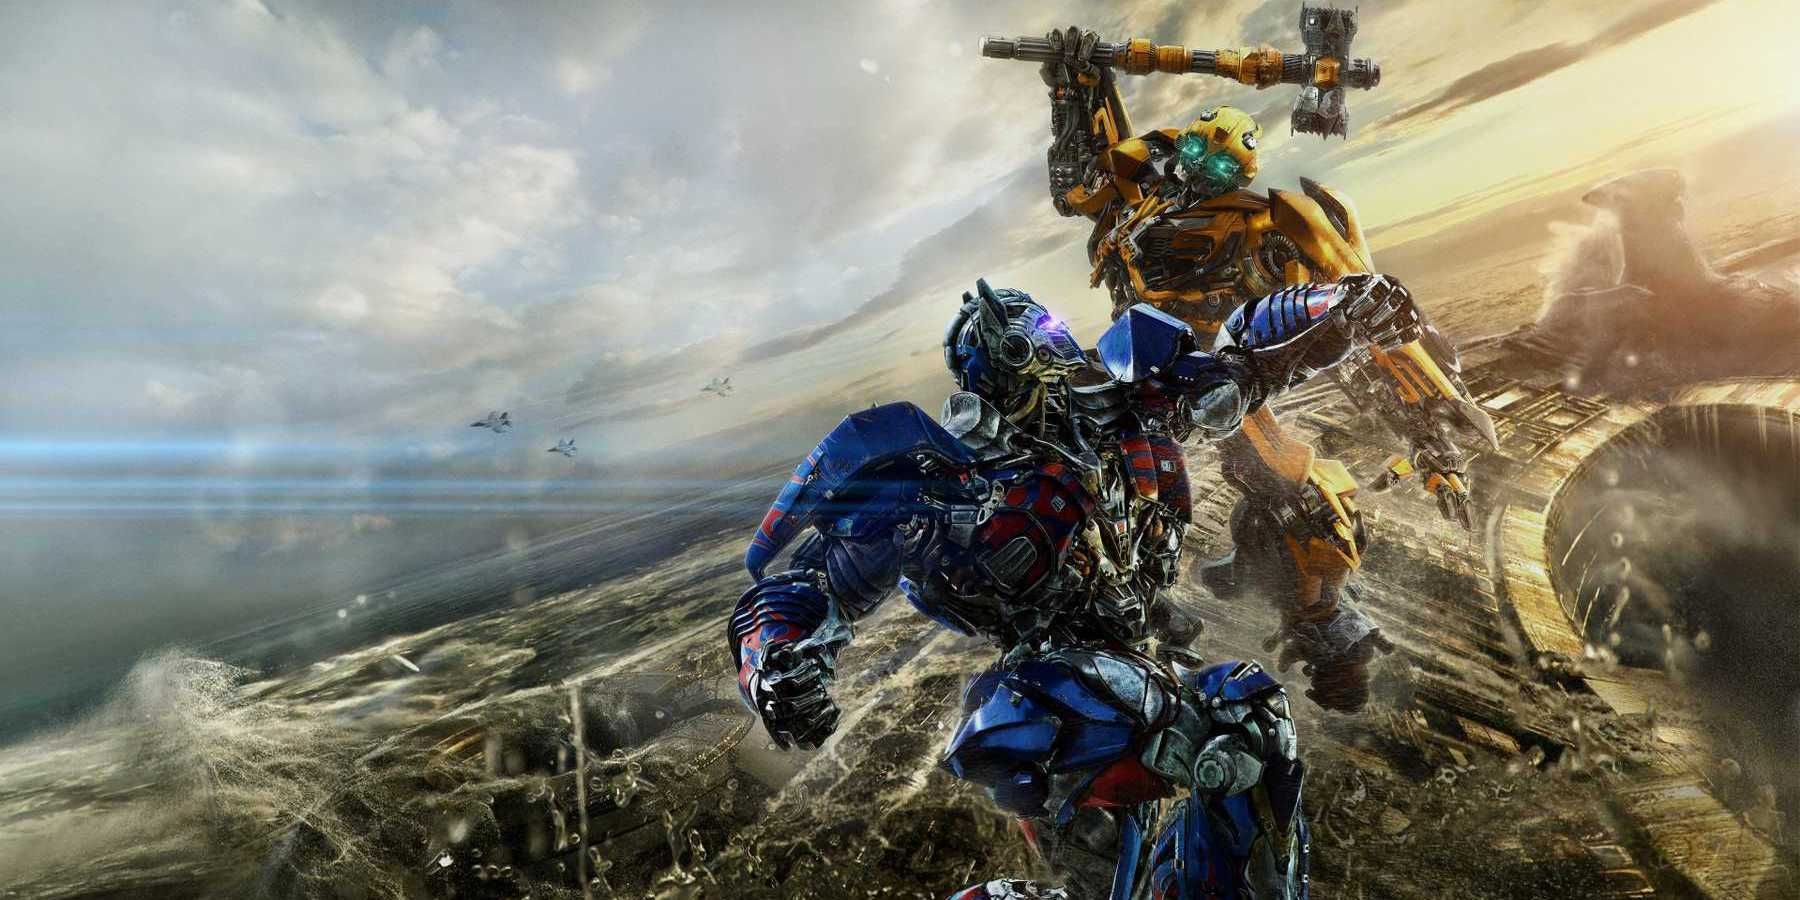 The 10 Best Action Sequences From The Transformers Franchise Ranked